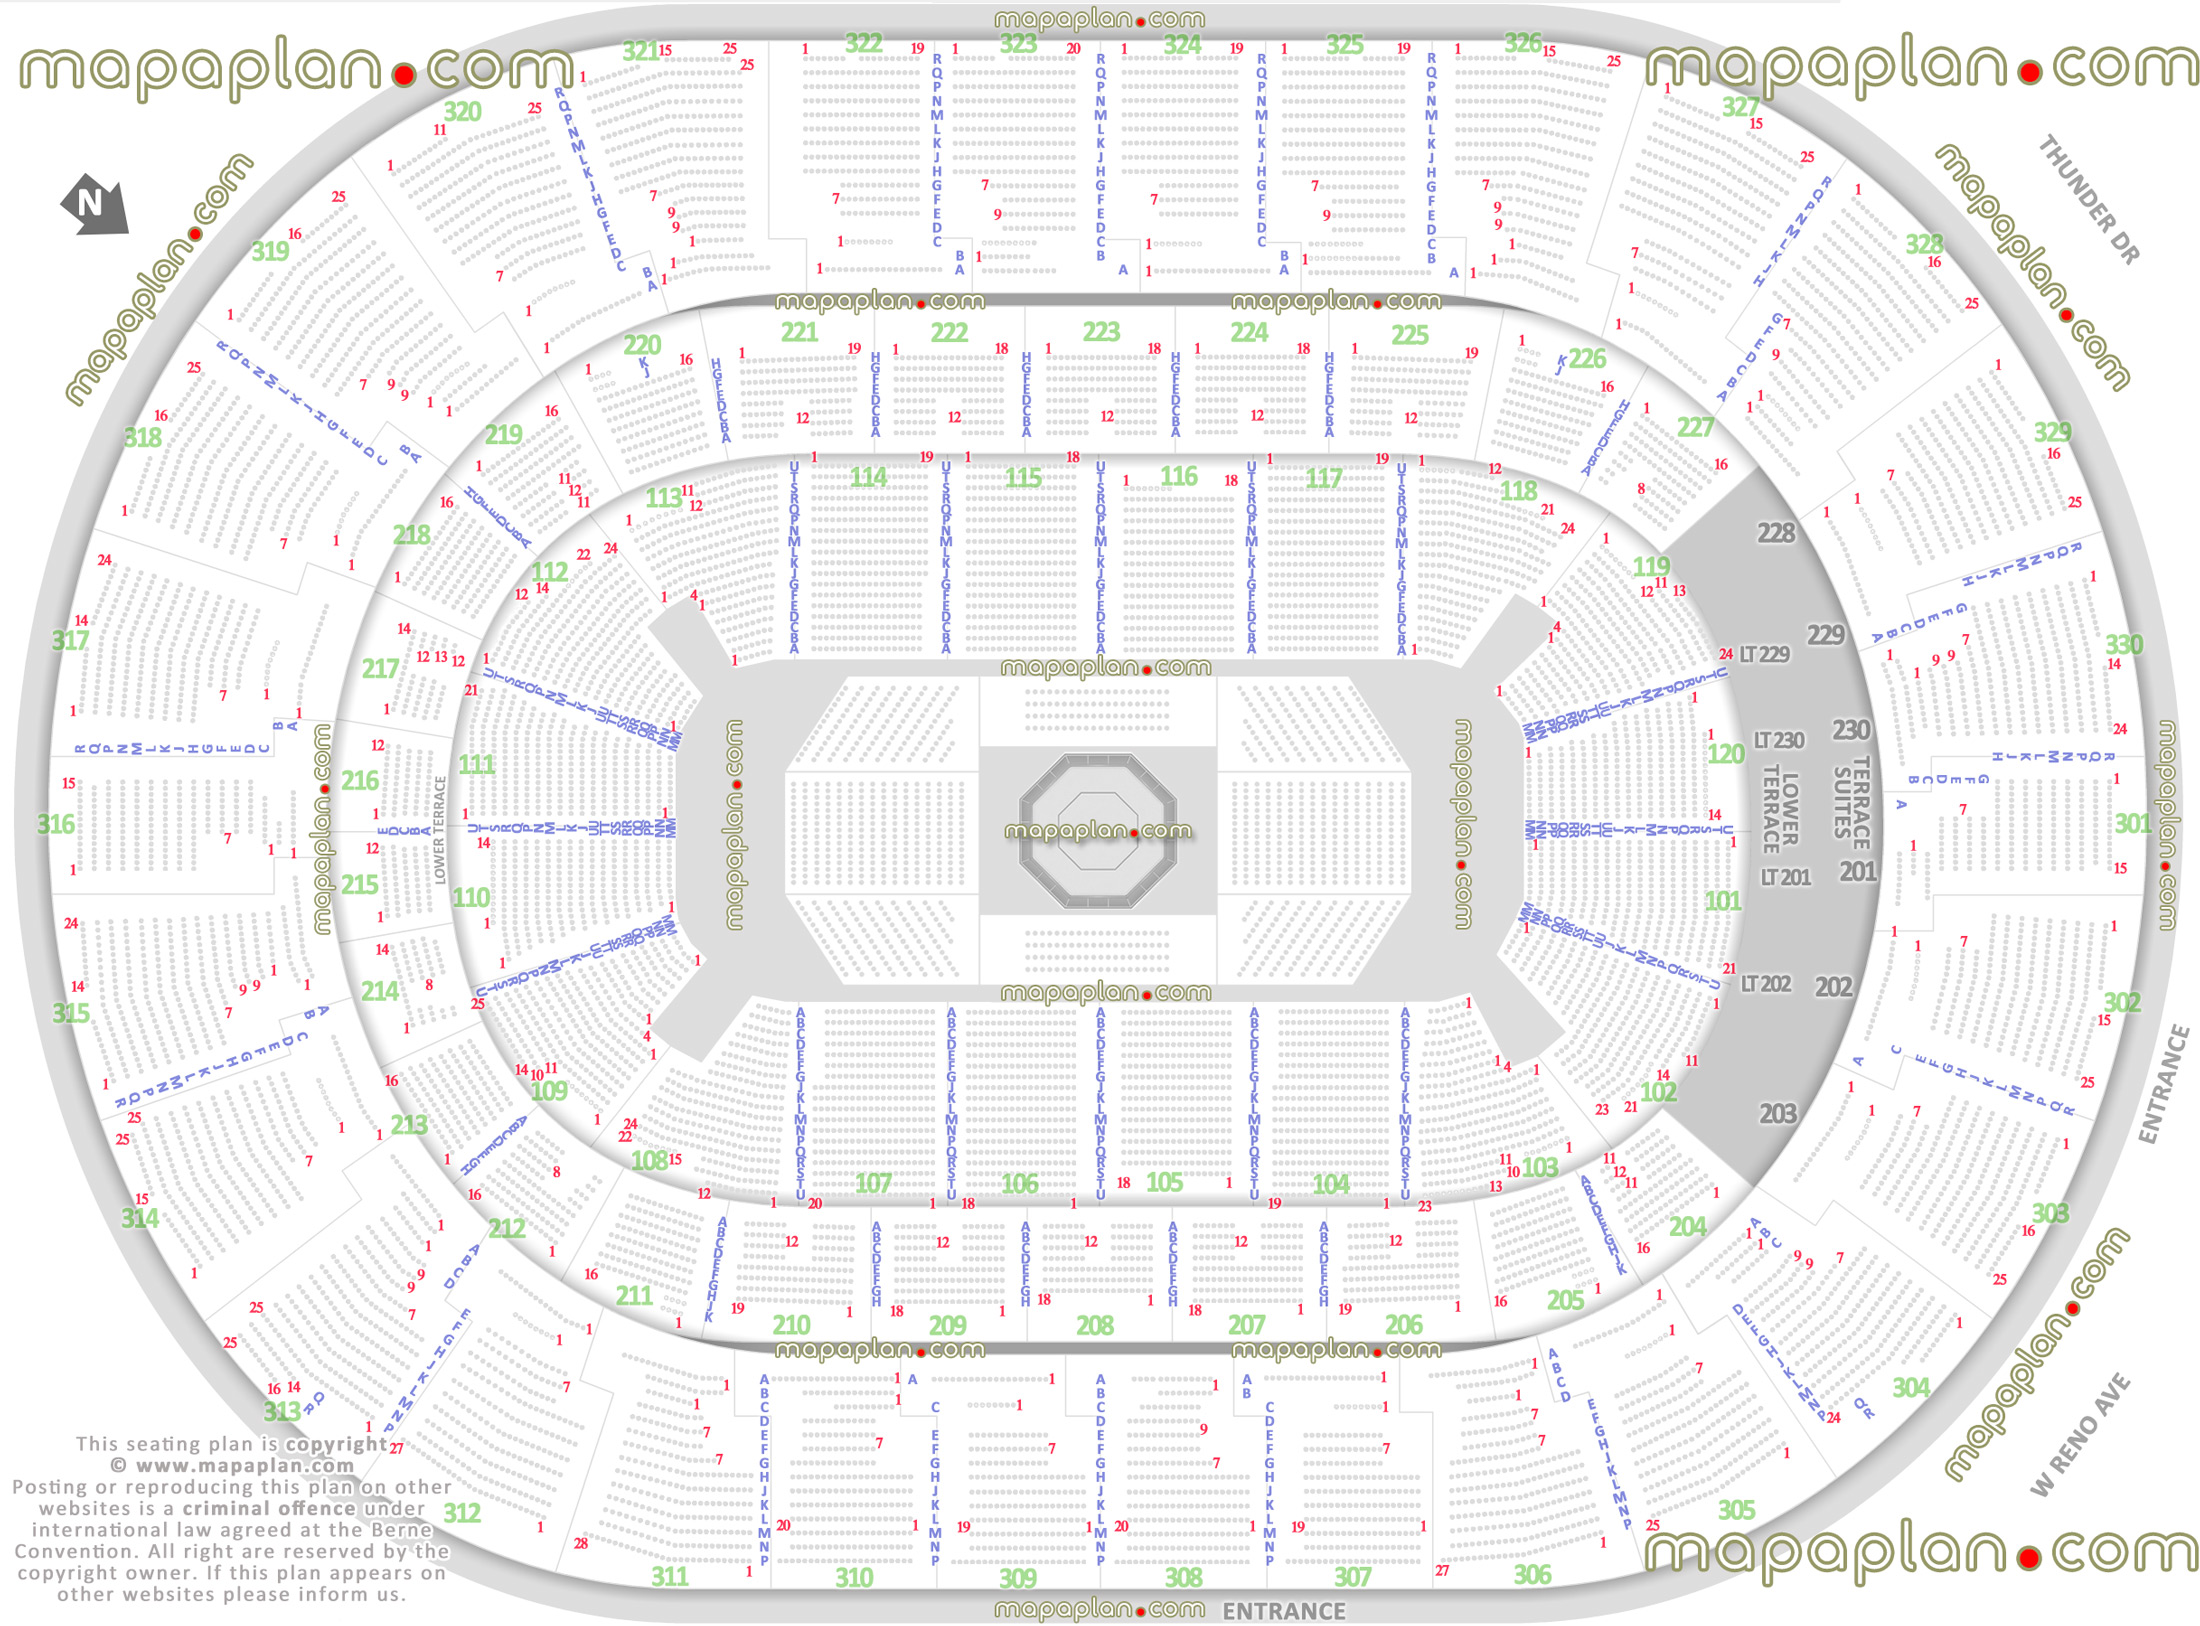 ufc seating chart row max seat capacity numbers rows each section detailed plan mma fights oklahoma lower club suites loud city upper level sections 301 302 303 304 305 306 307 308 309 310 311 312 313 314 315 316 317 318 319 320 321 322 323 324 325 326 327 328 329 330 Oklahoma City Chesapeake Energy Arena seating chart